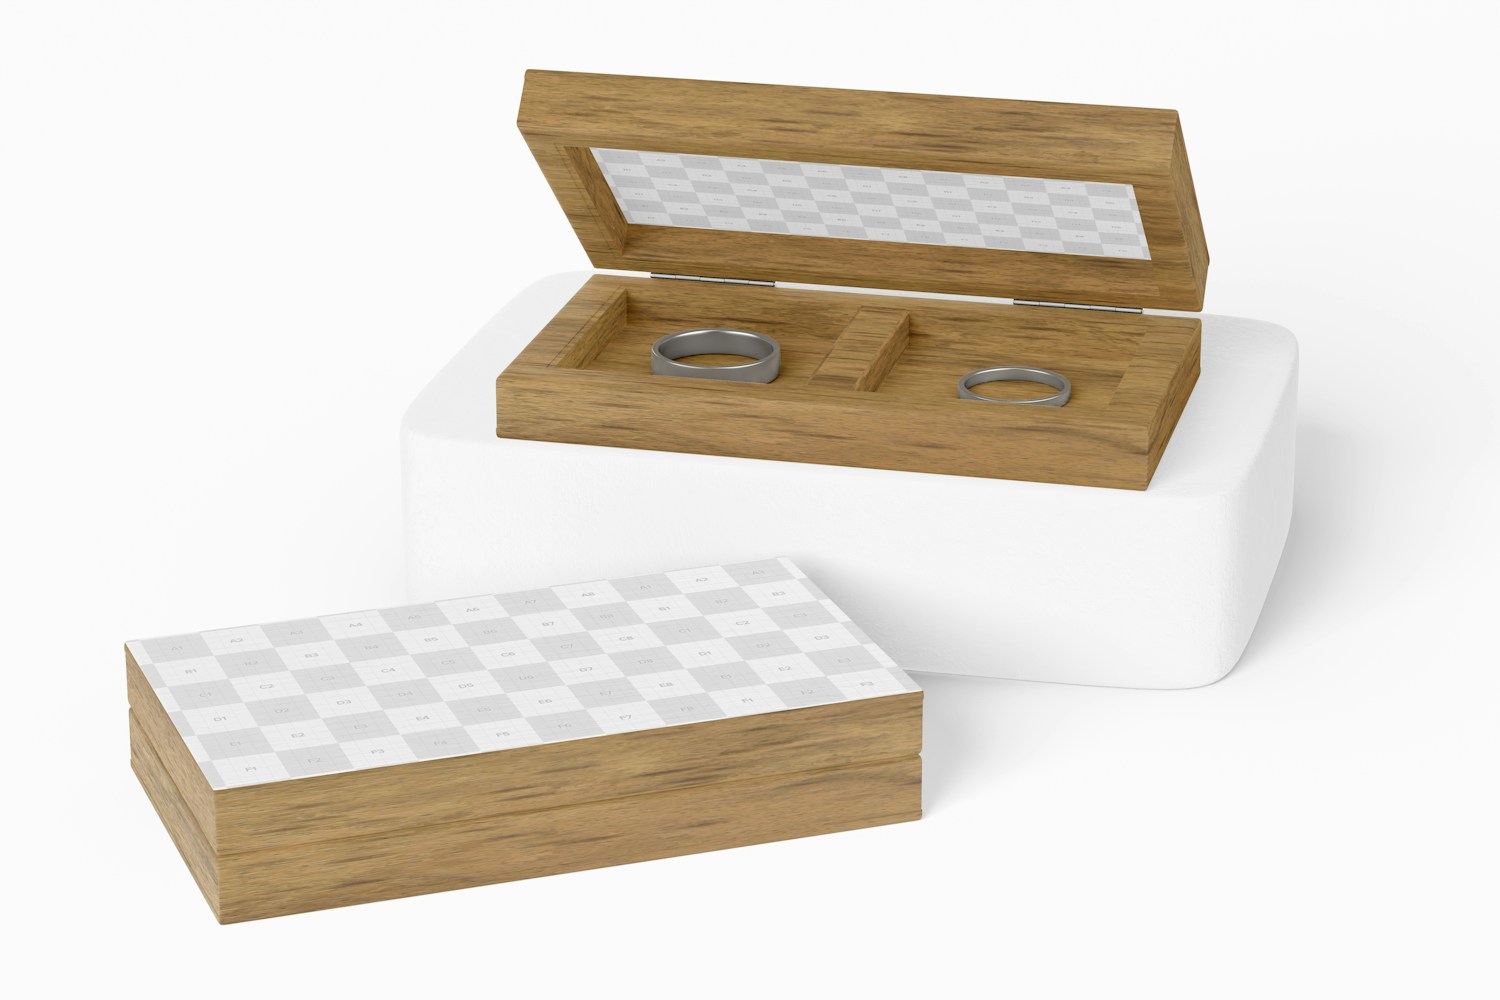 Wooden Ring Boxes Mockup, Opened and Closed